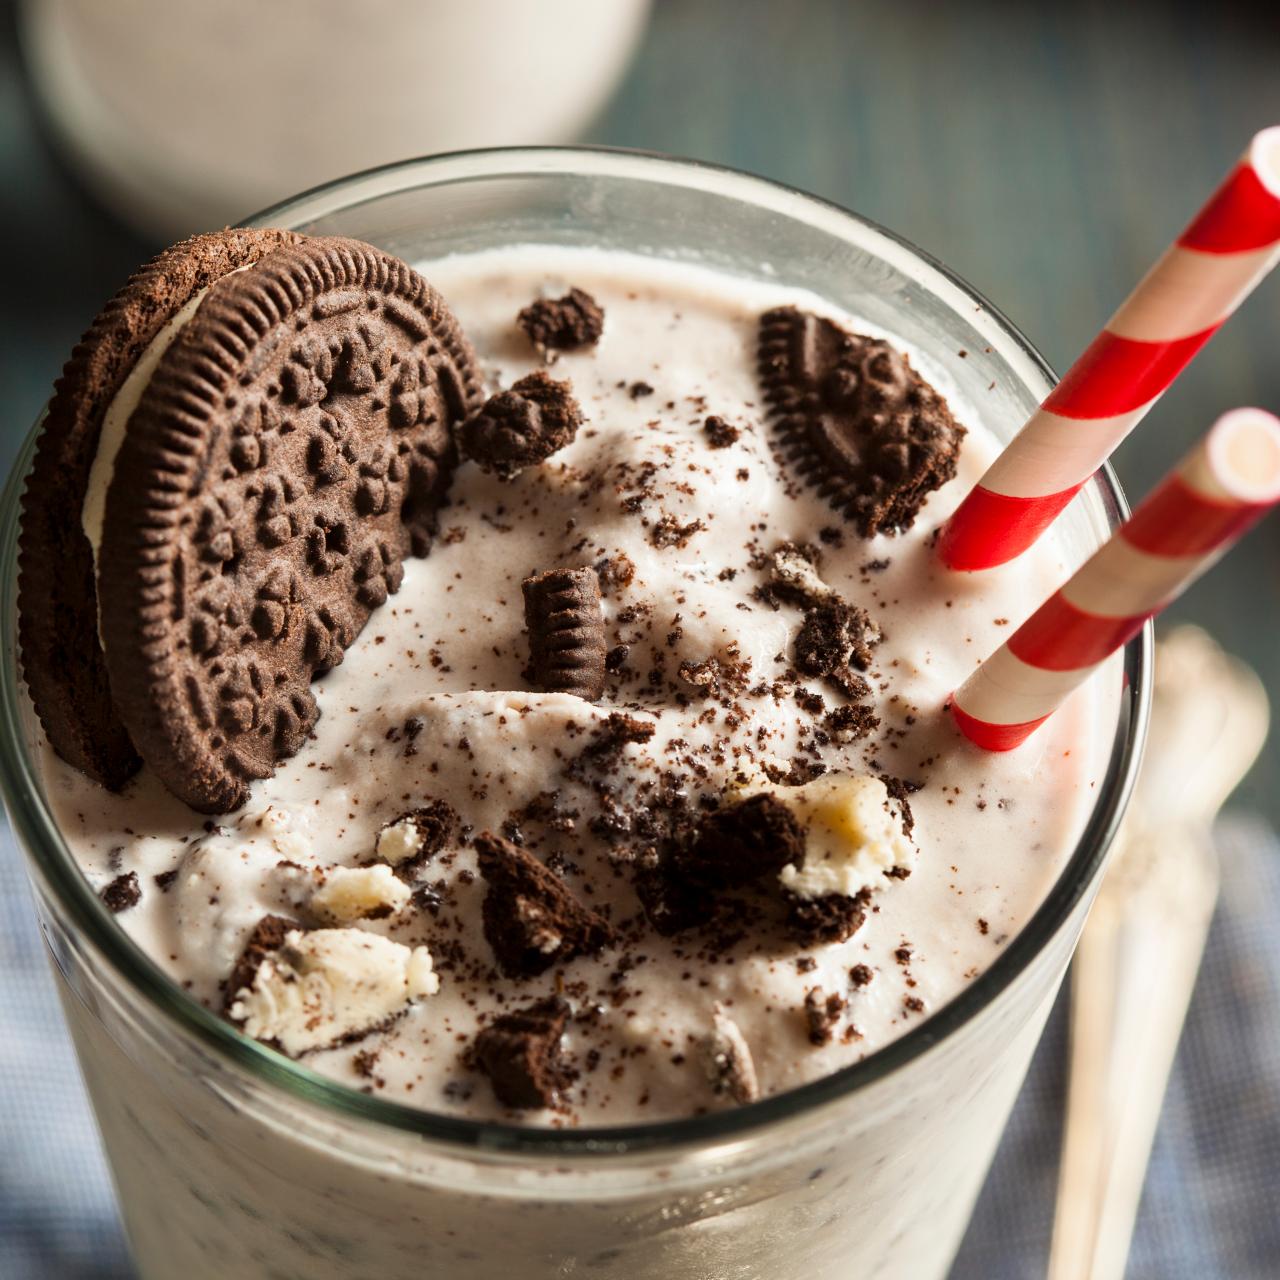 How to Make a Milkshake with a Blender